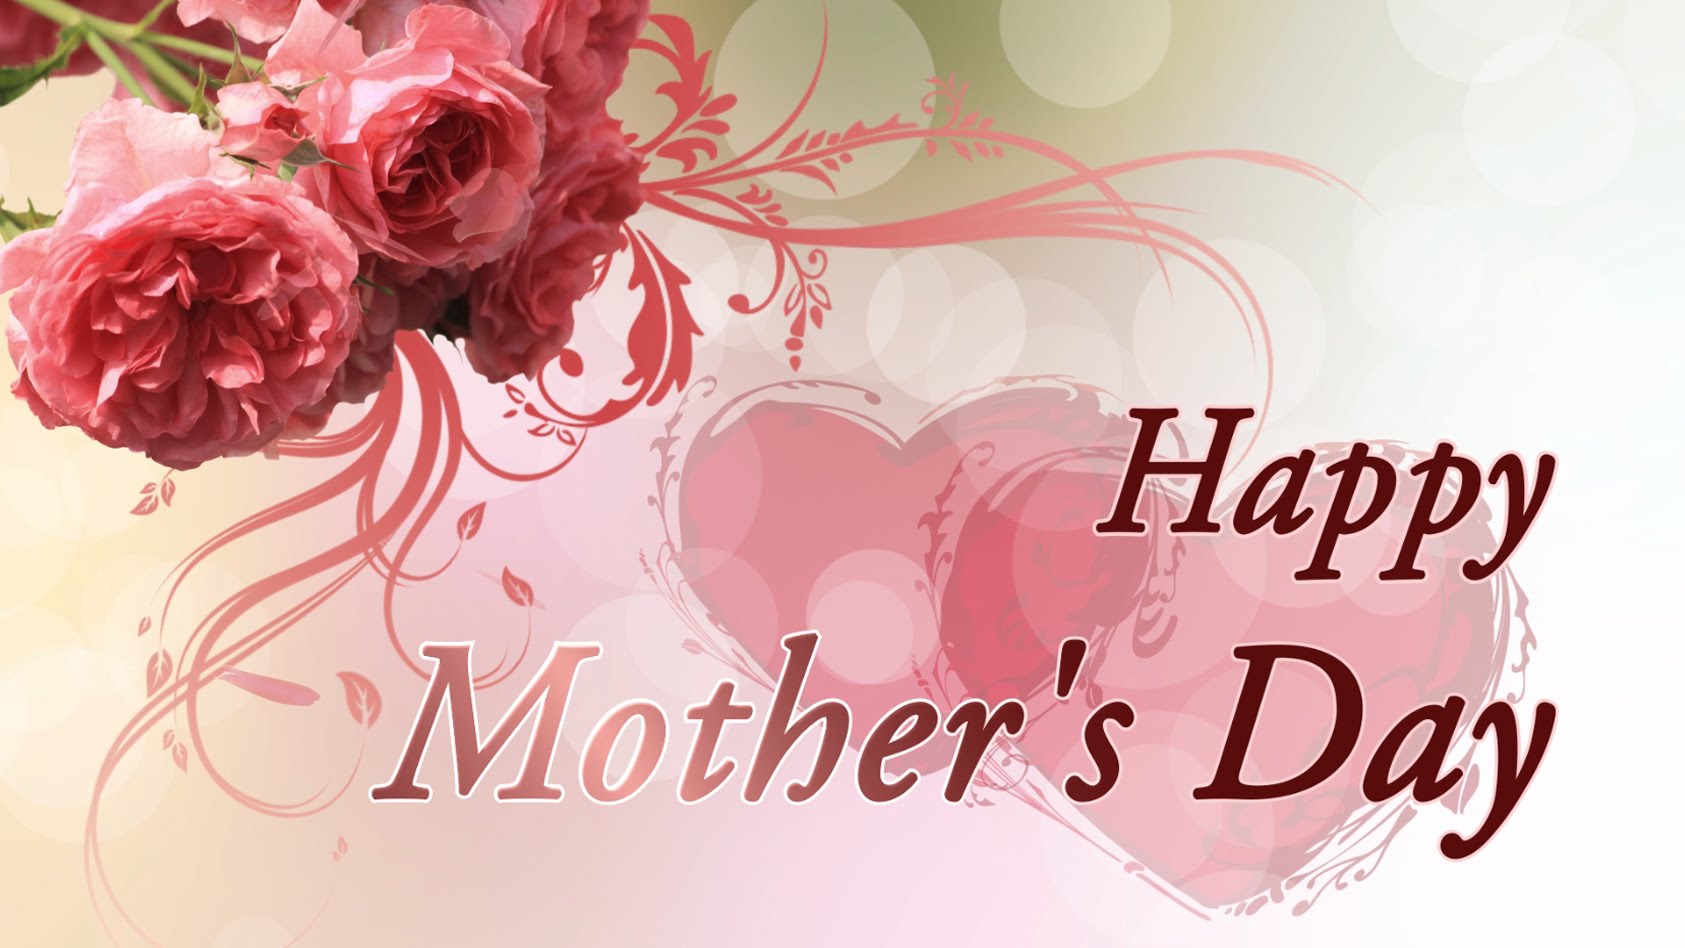 Mother's Day Picture, HD Images and HD Wallpapers for Mobile and PC Destop